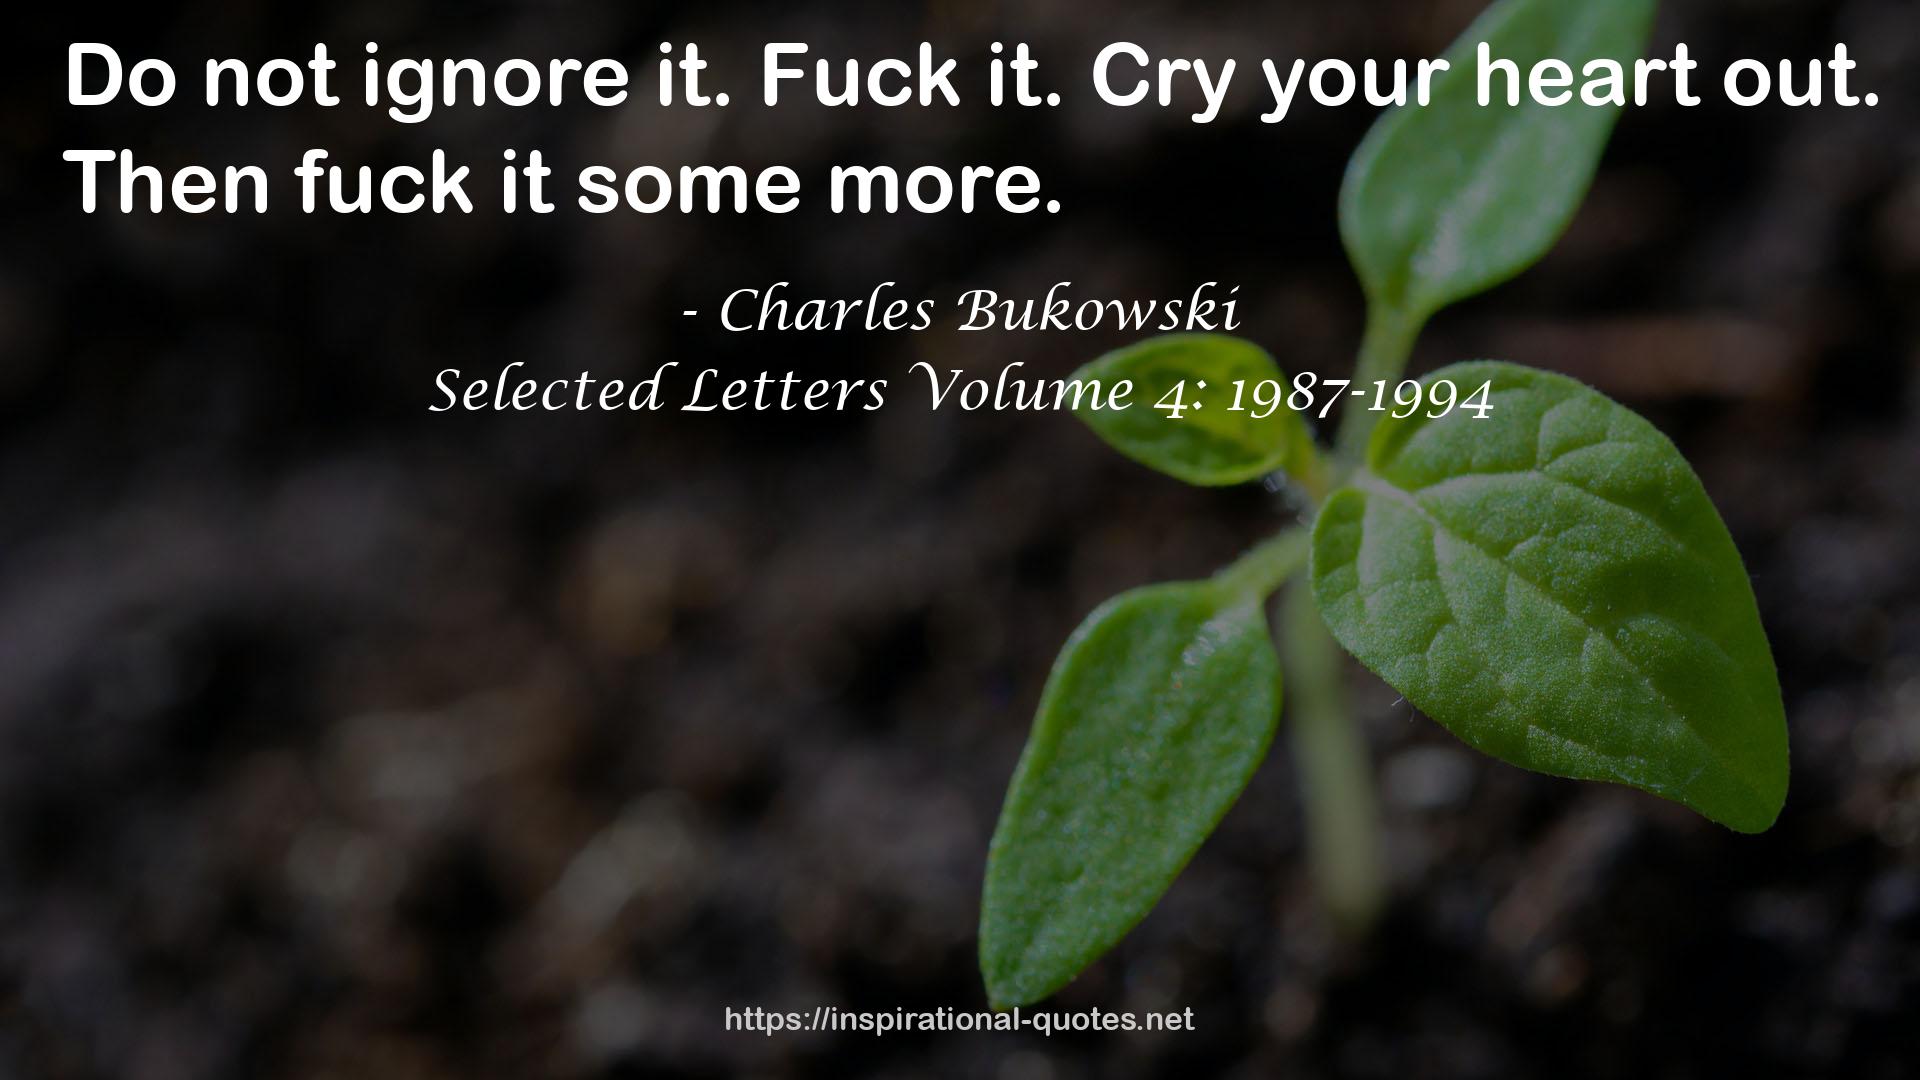 Selected Letters Volume 4: 1987-1994 QUOTES